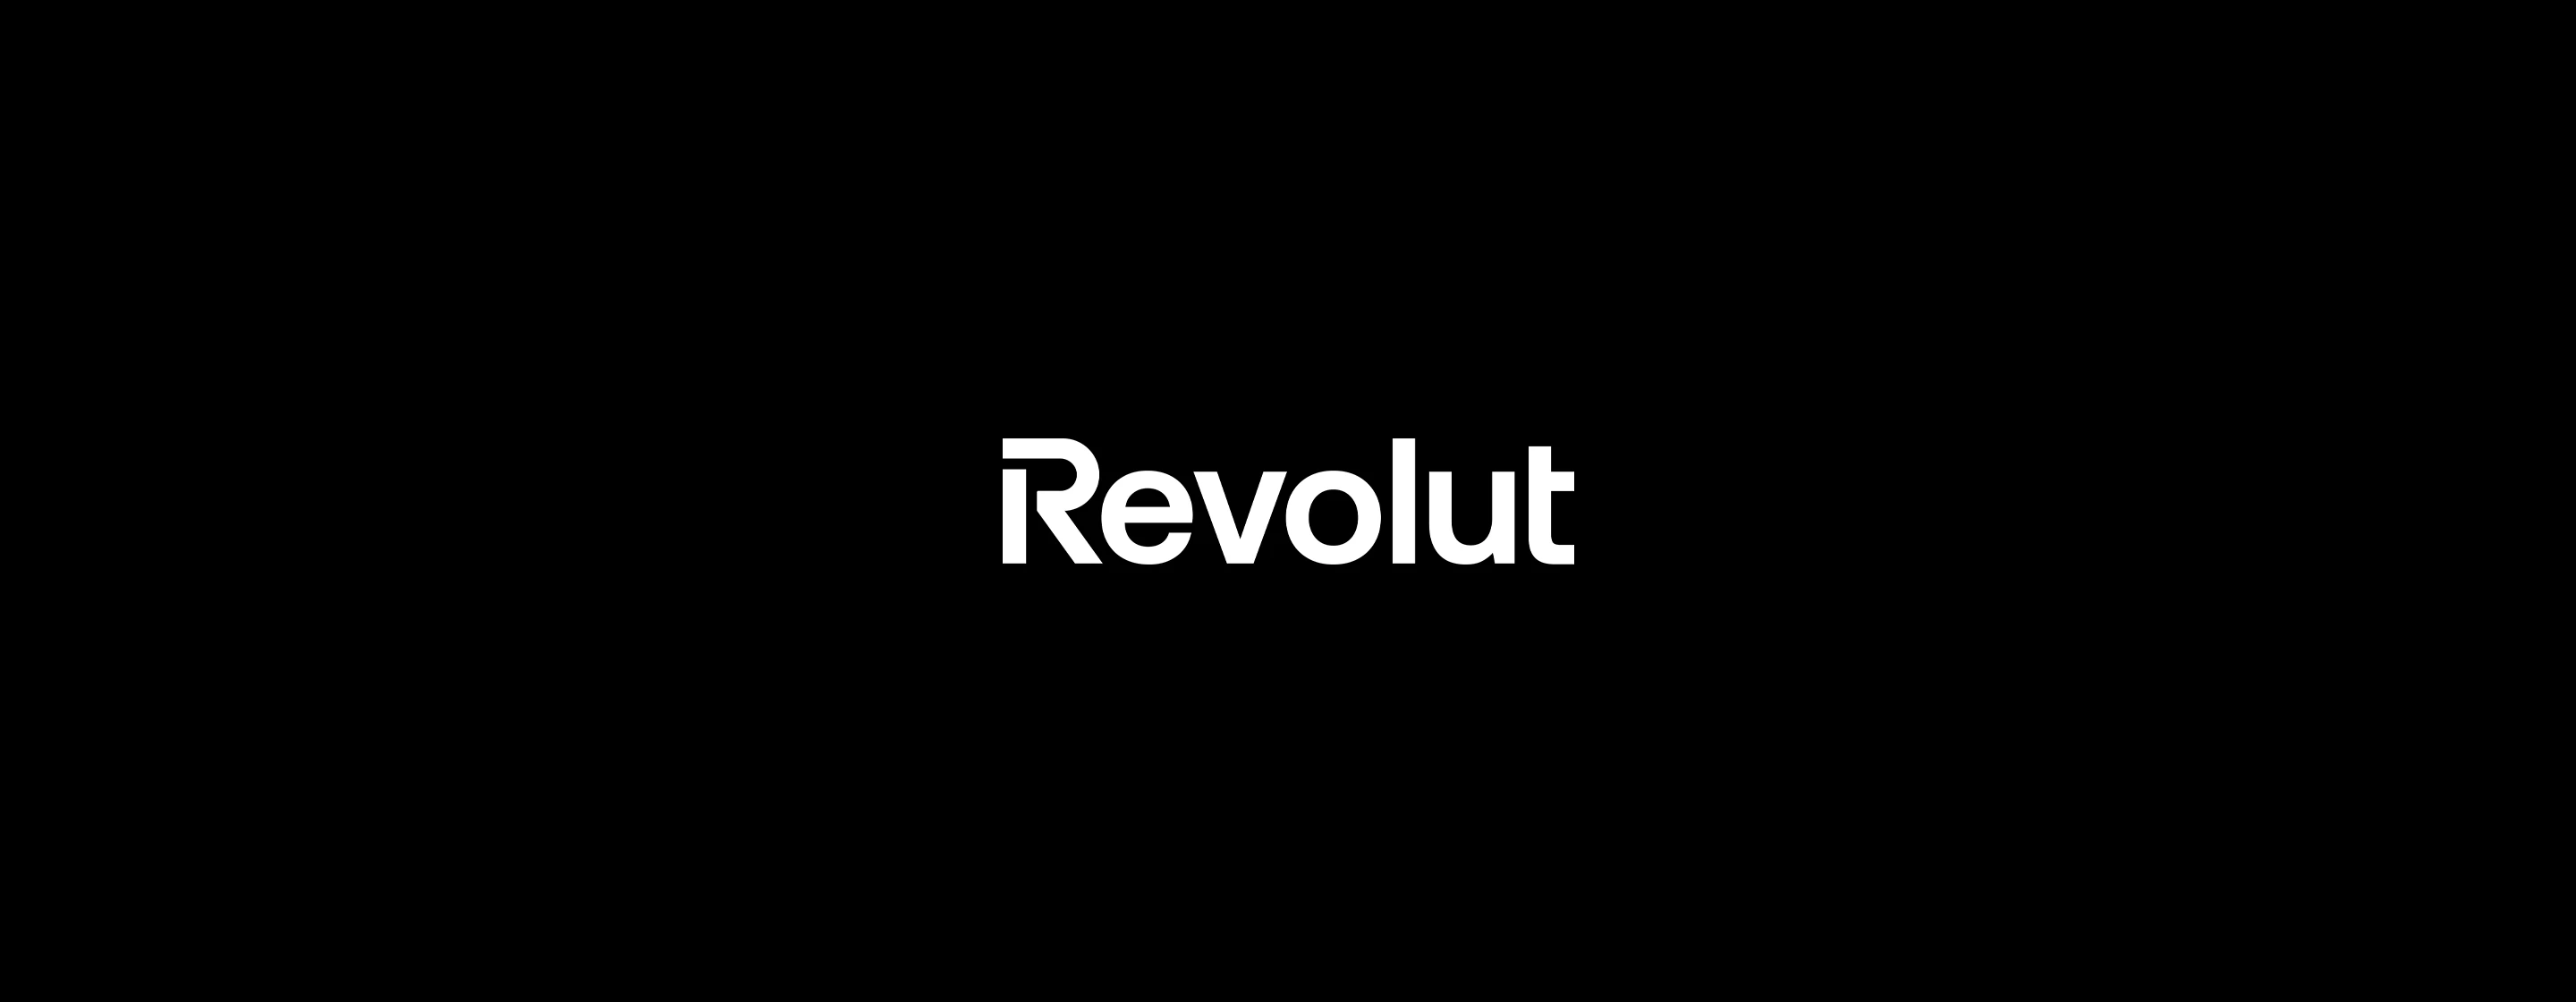 Revolut Users Lose Wedding Funds In Fraudulent Transactions